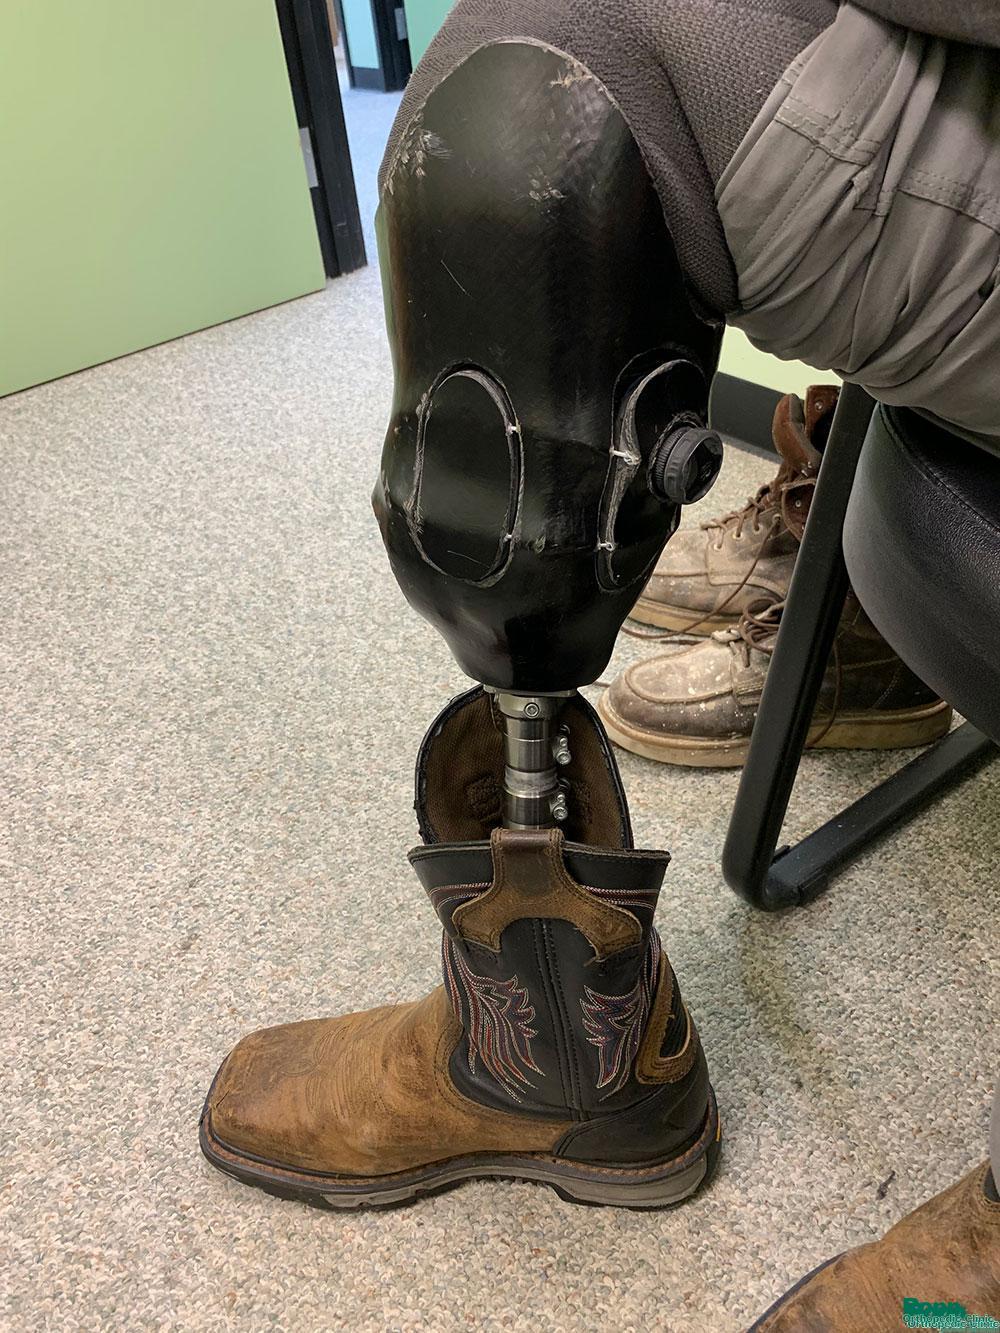 Adjusting the prosthesis for boots